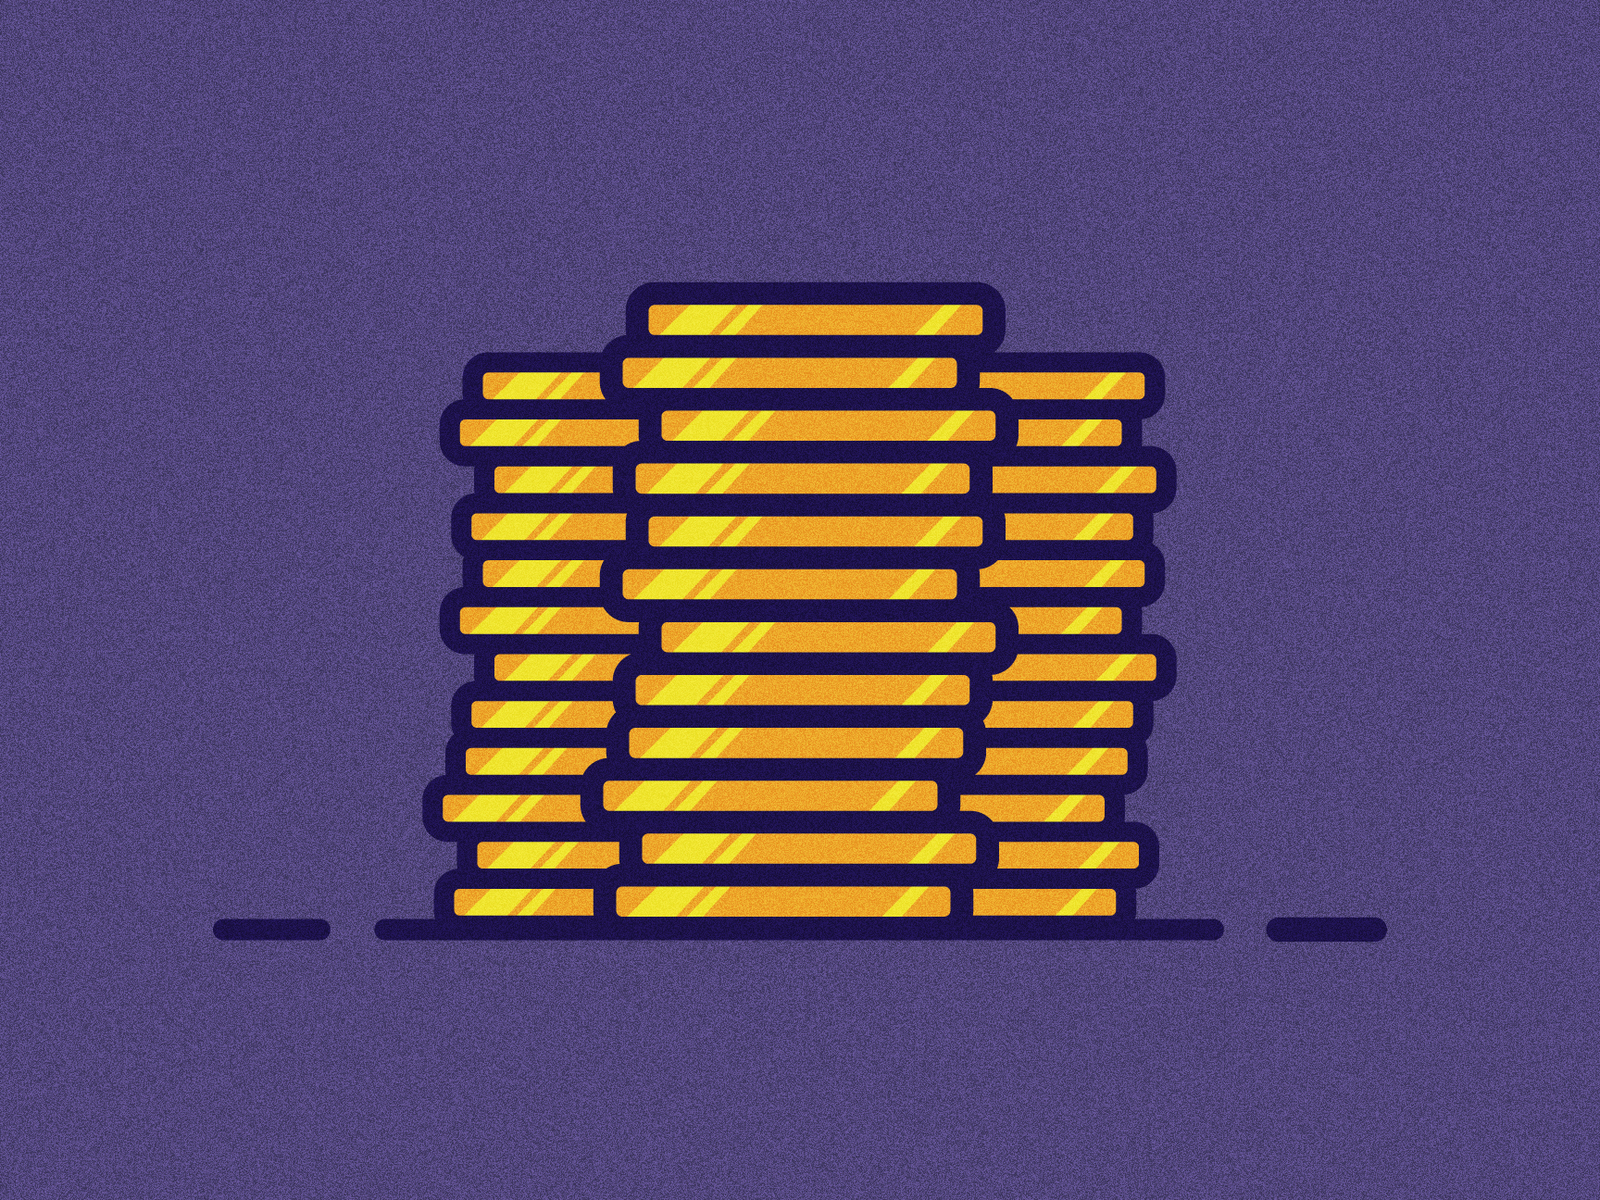 Gold Coins by Luke Summerhayes on Dribbble